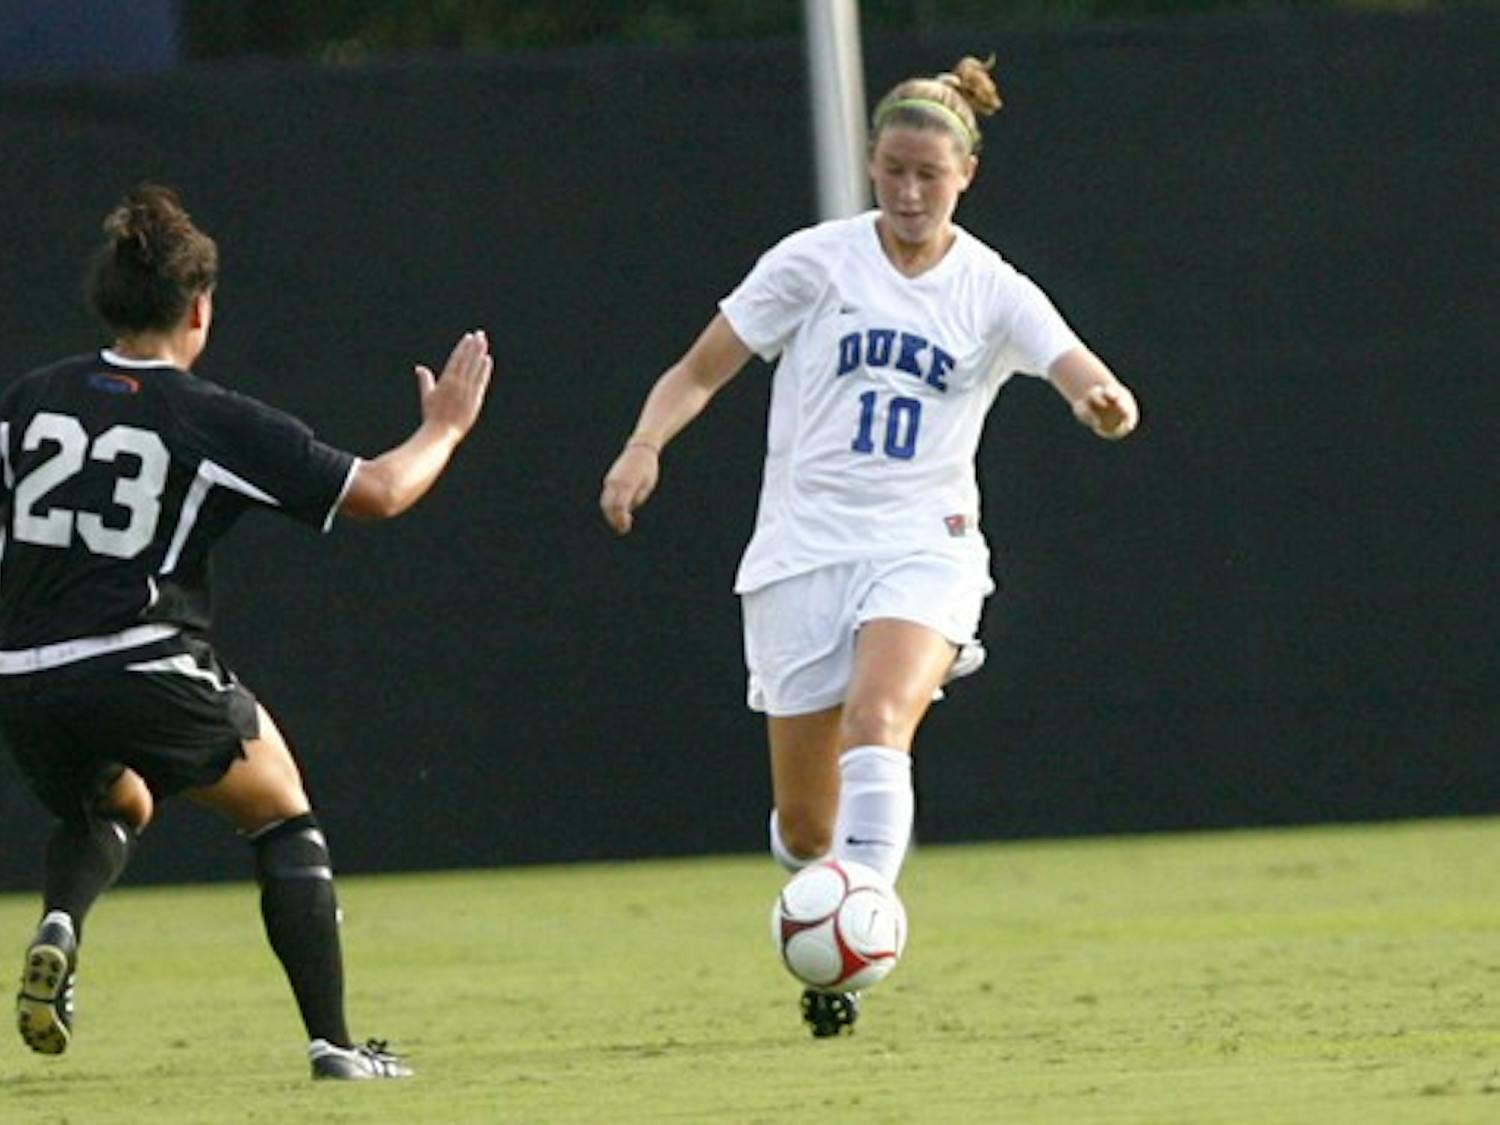 Freshman Nicole Lipp and the Blue Devils will have their work cut out for them against a stingy Rutgers defense.